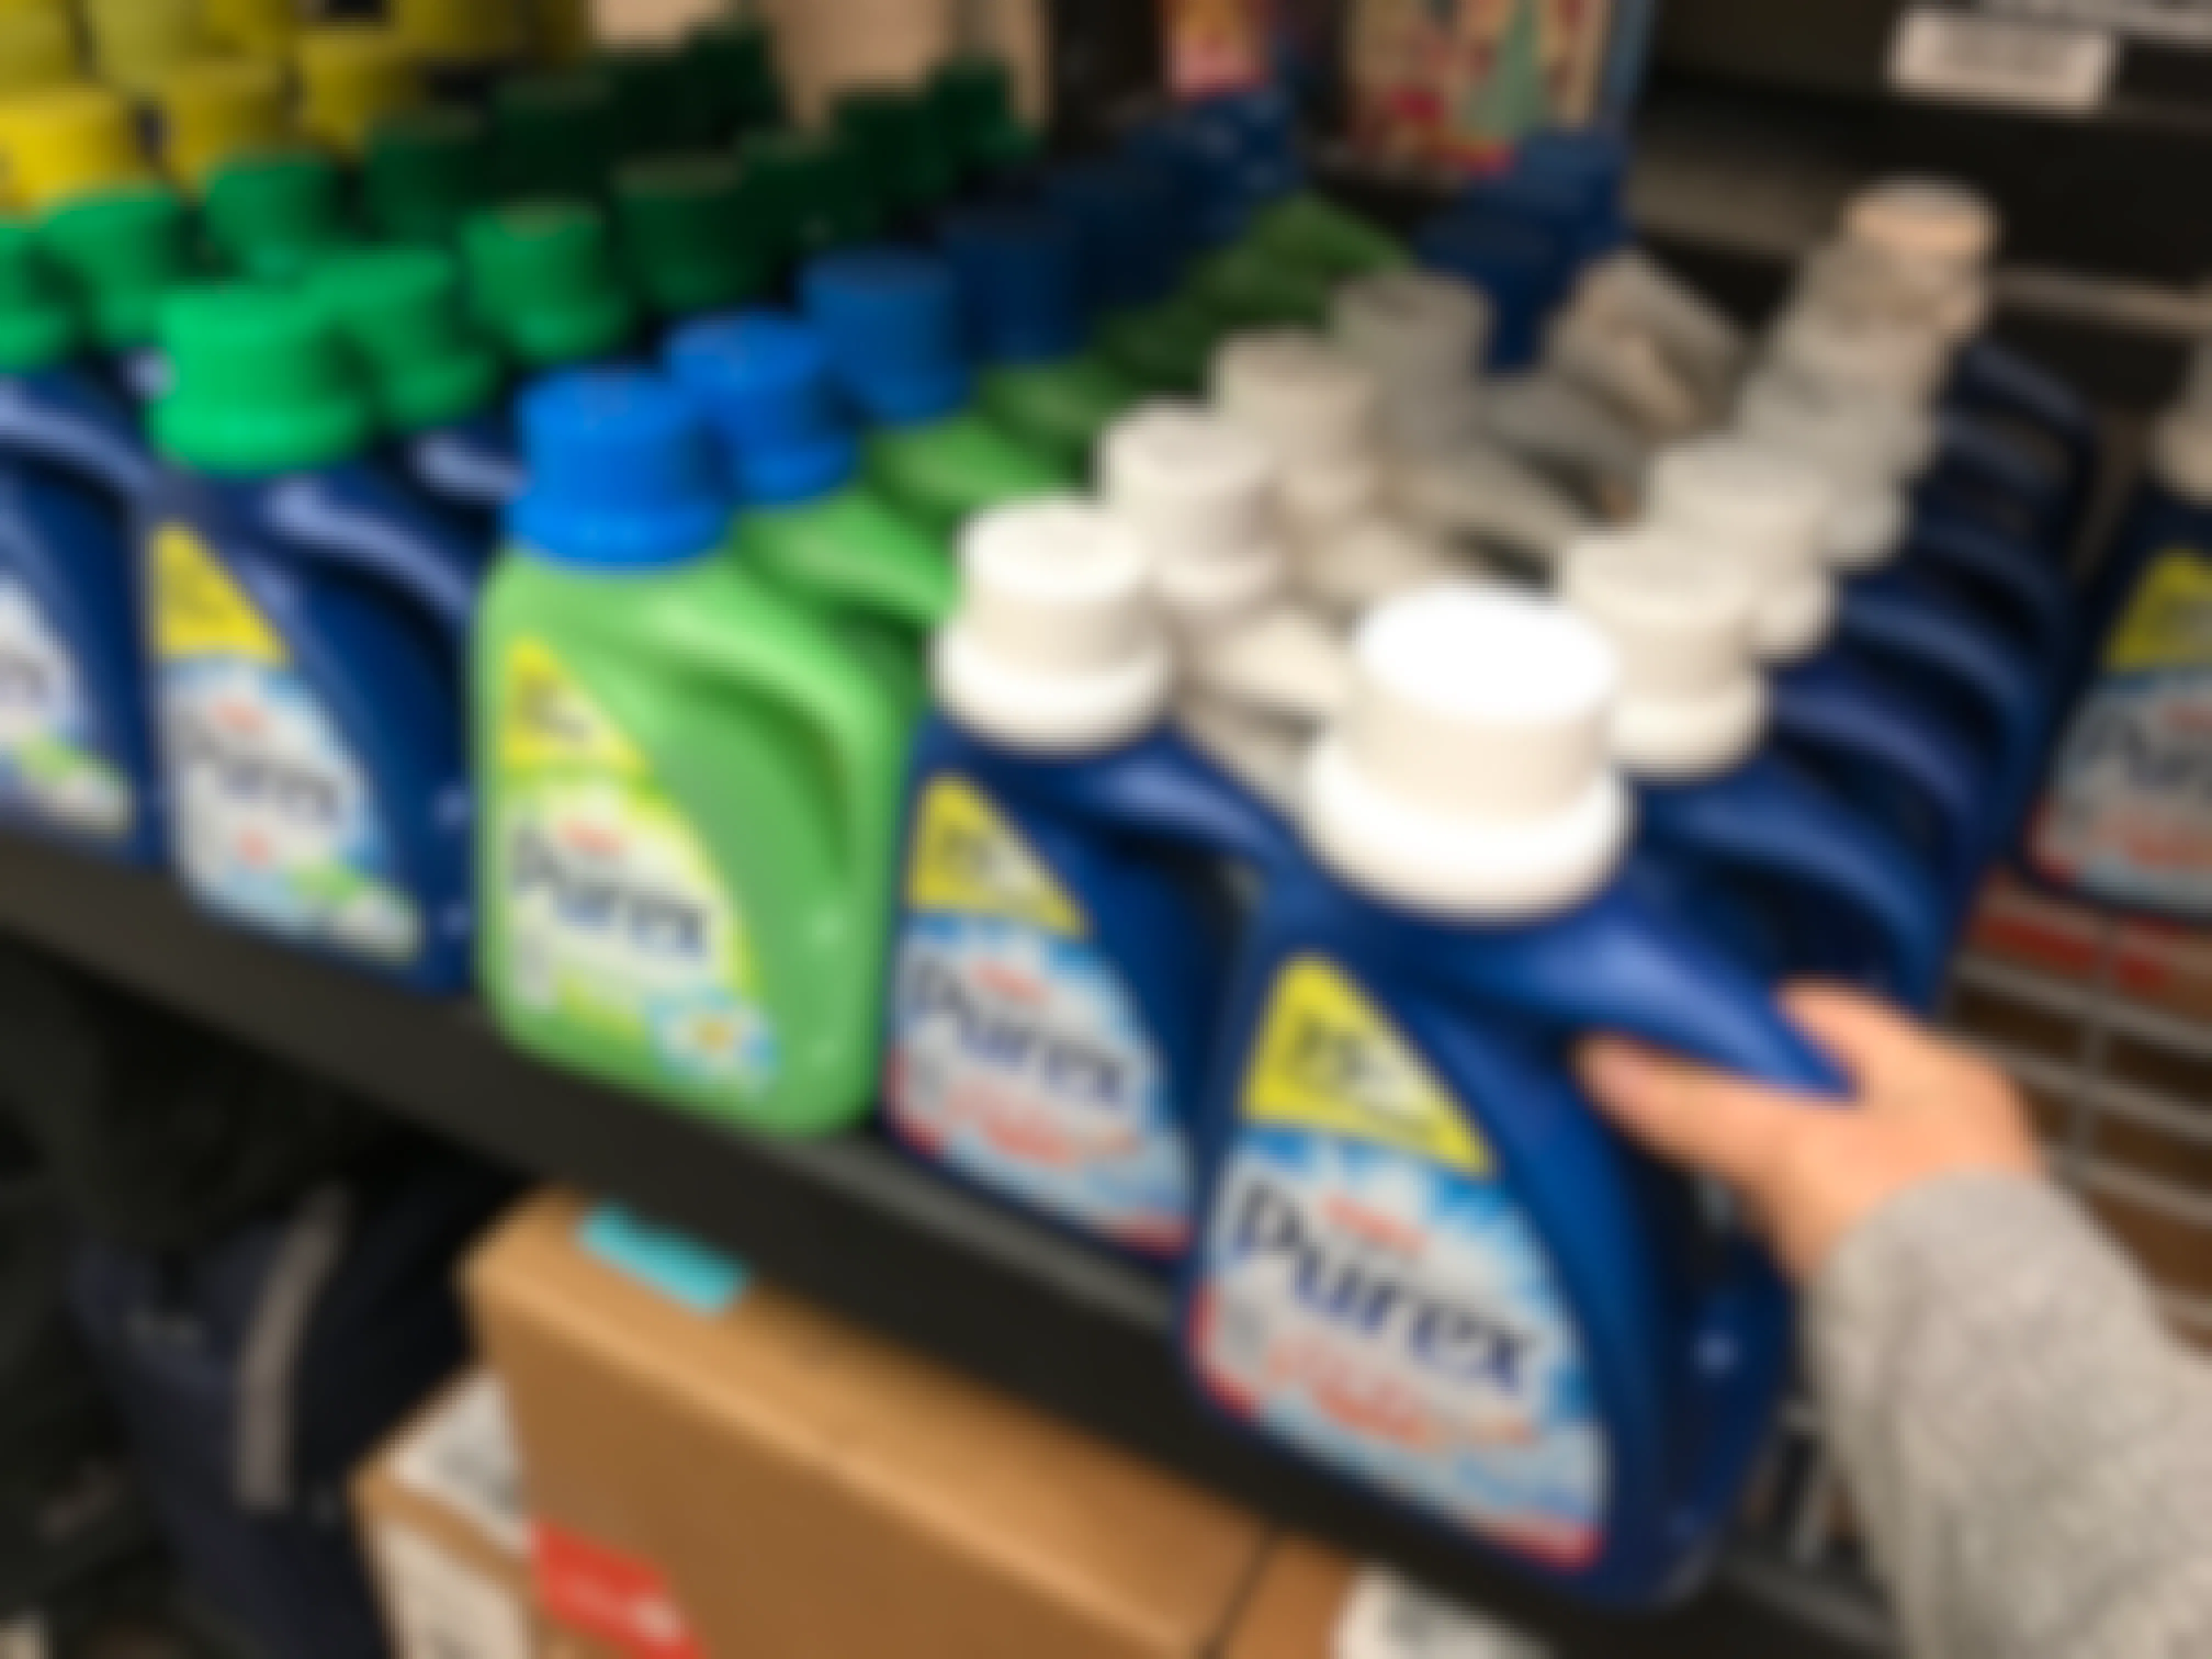 12 Laundry Detergent Stockpiles That Will Make You Envious